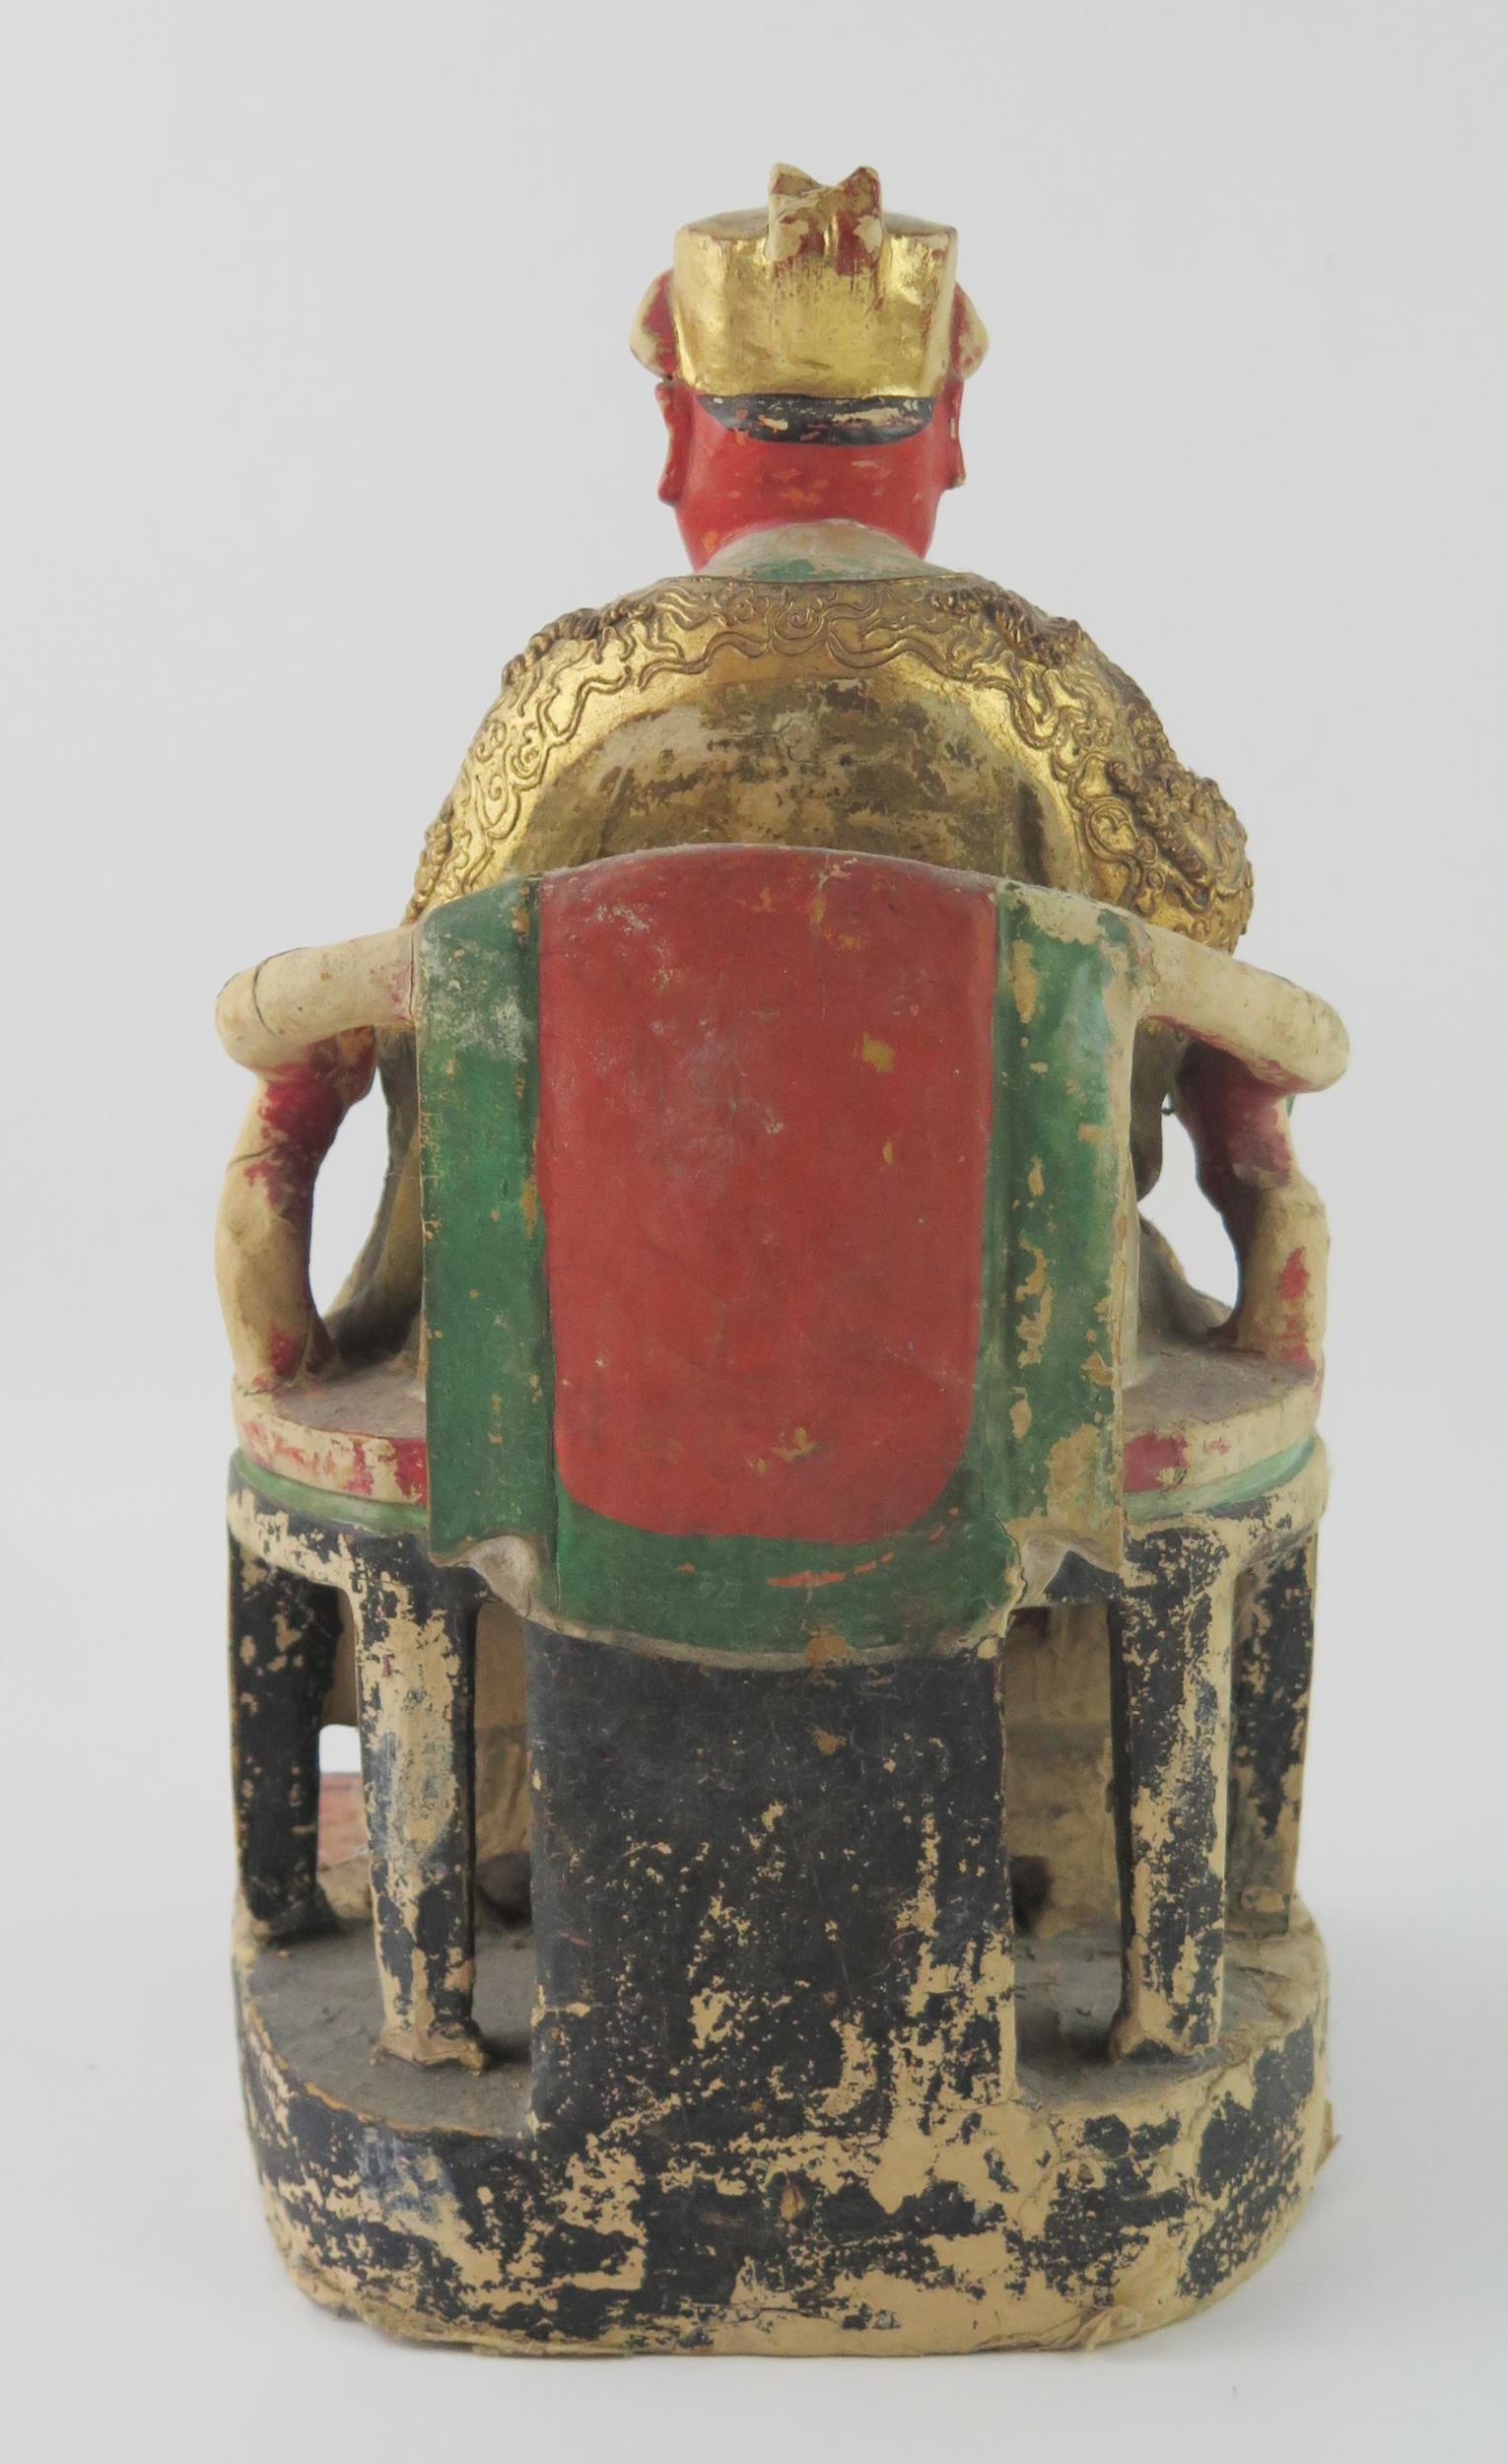 A late 19th century polychrome carved wooden figure of a seated emperor, with gilded decoration, - Image 5 of 8